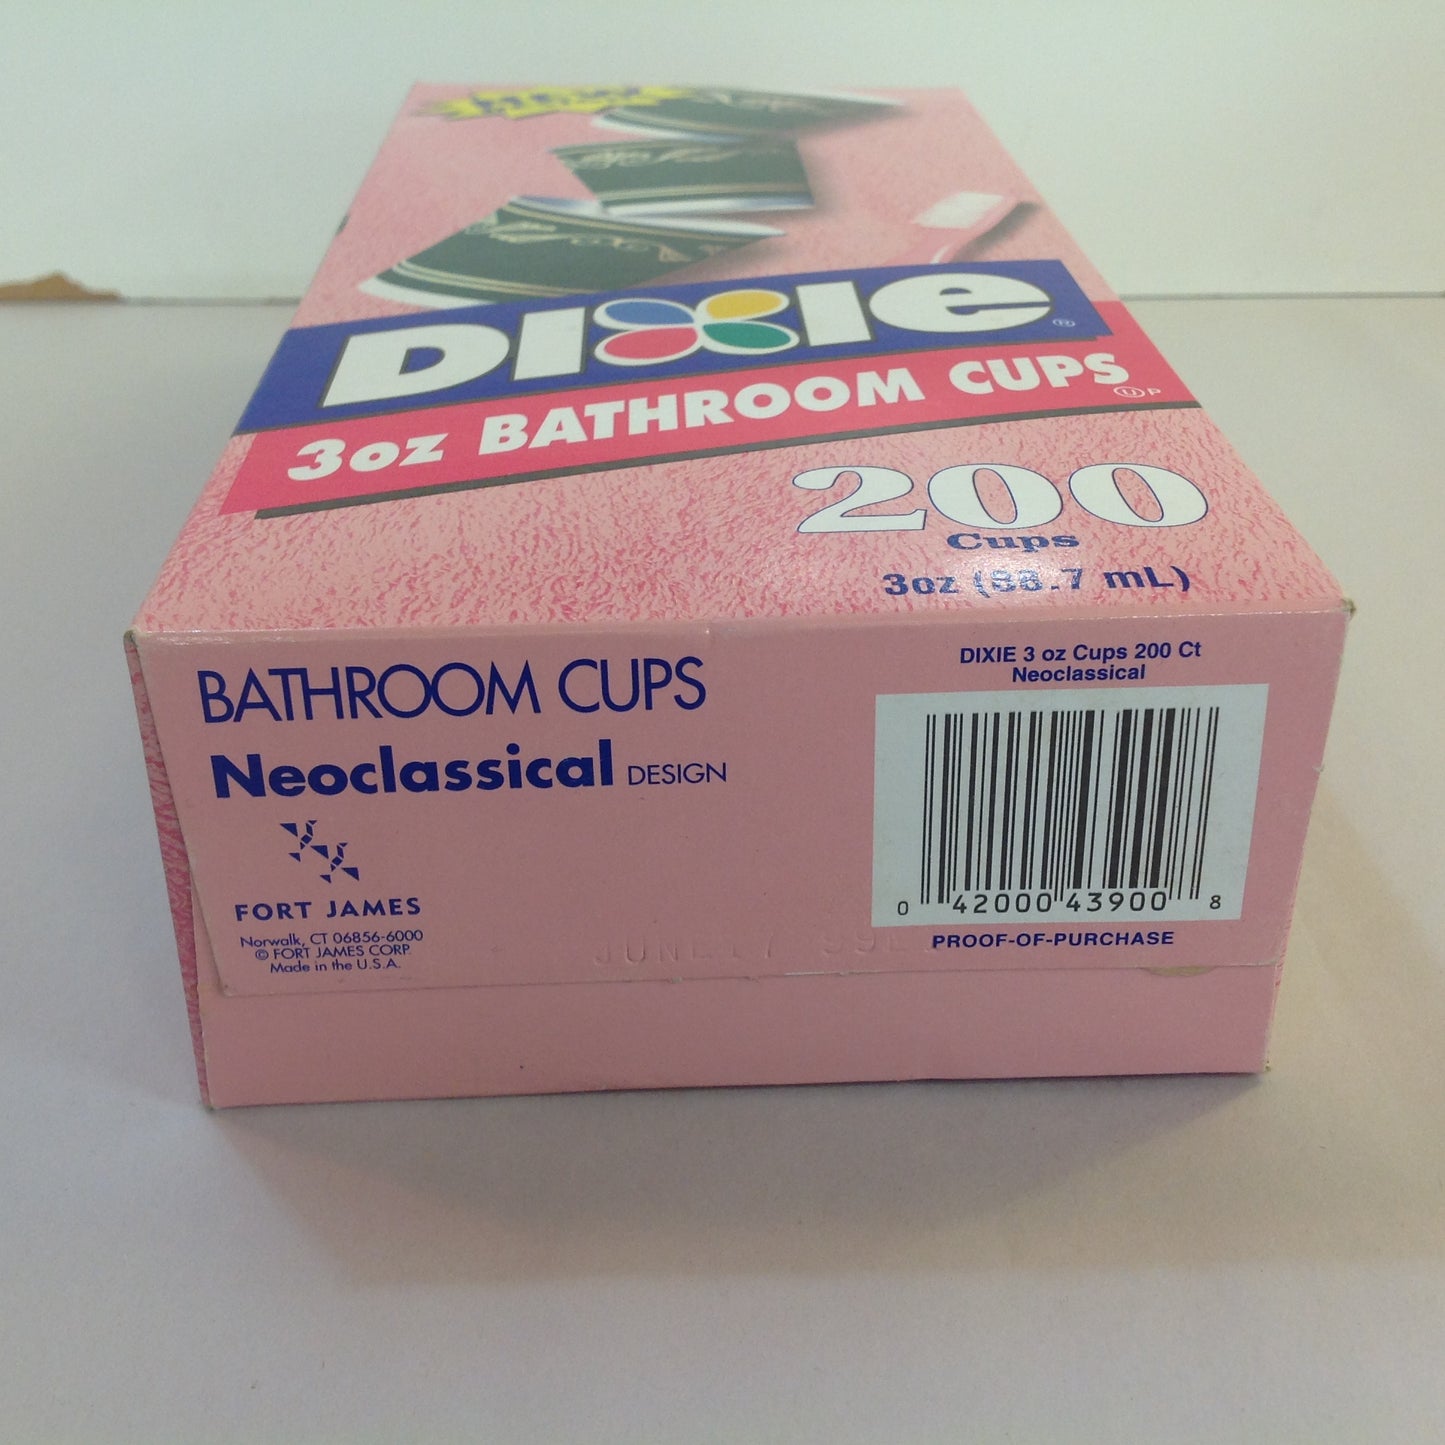 Vintage 1999 NOS Dixie 3 oz Bathroom Cups 200 Count Neoclassical